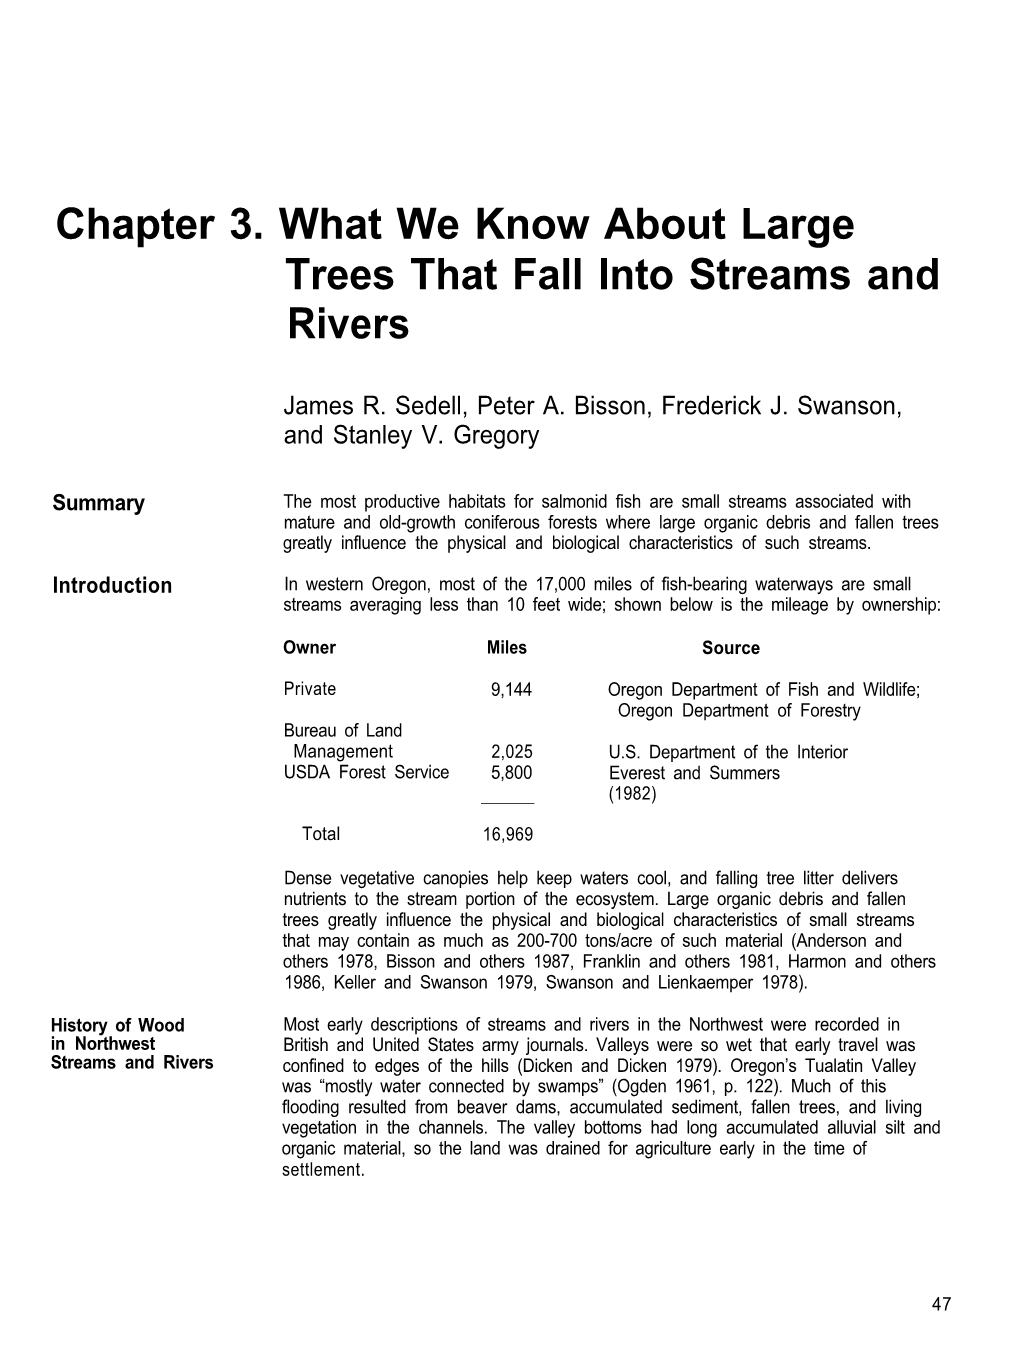 Chapter 3. What We Know About Large Trees That Fall Into Streams and Rivers